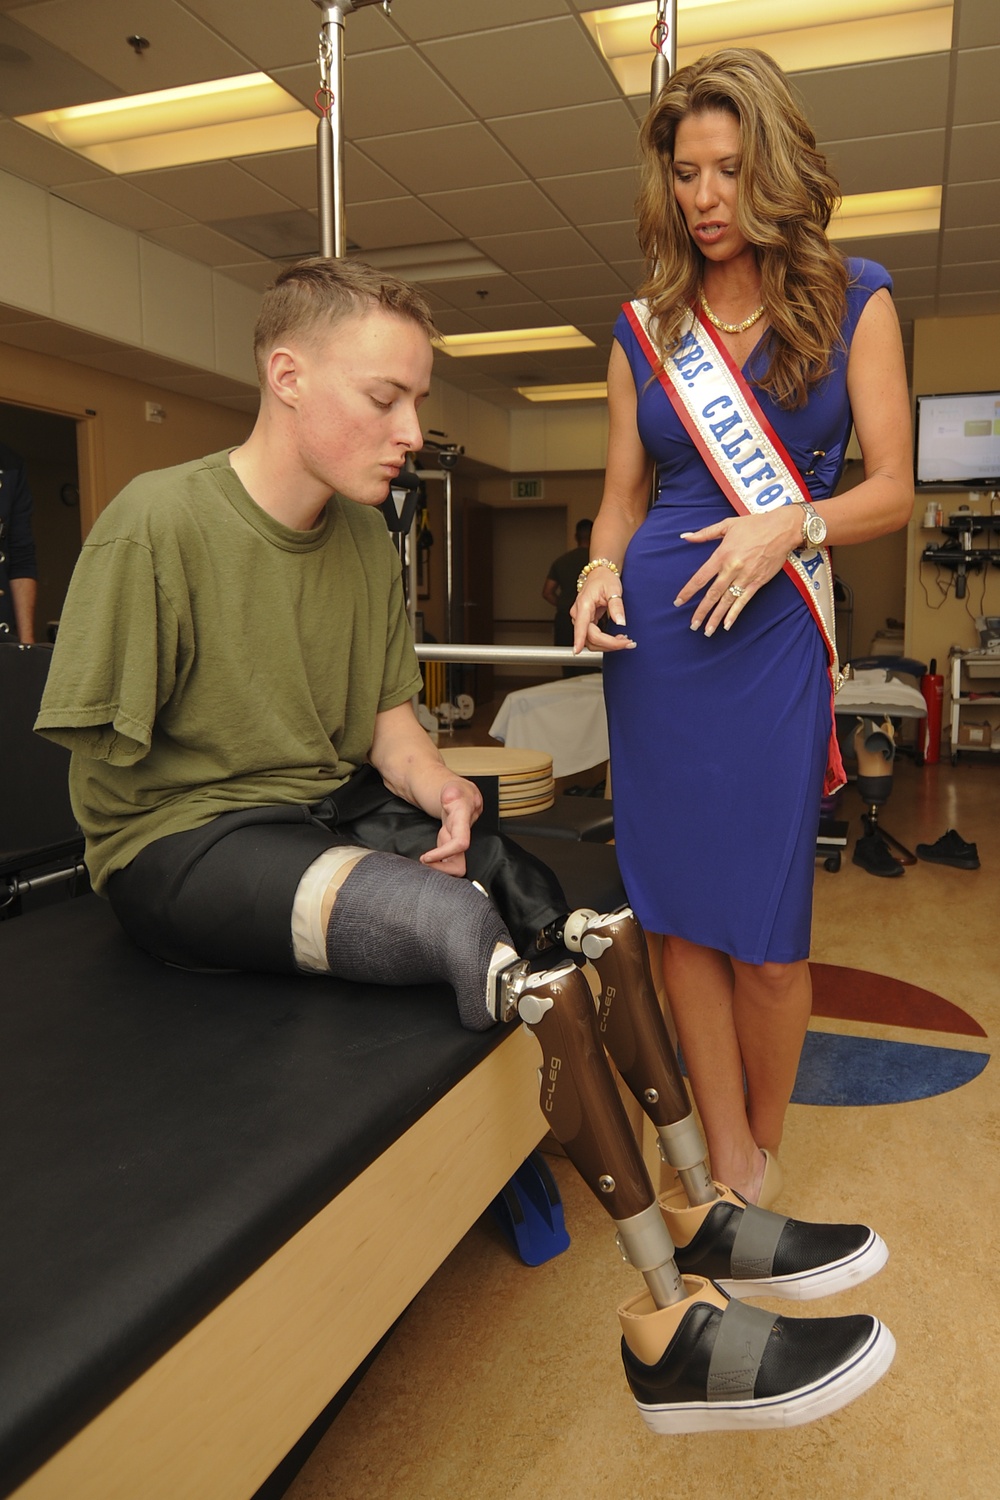 Mrs. California-America 2012 visits Combat and Complex Casualty Care